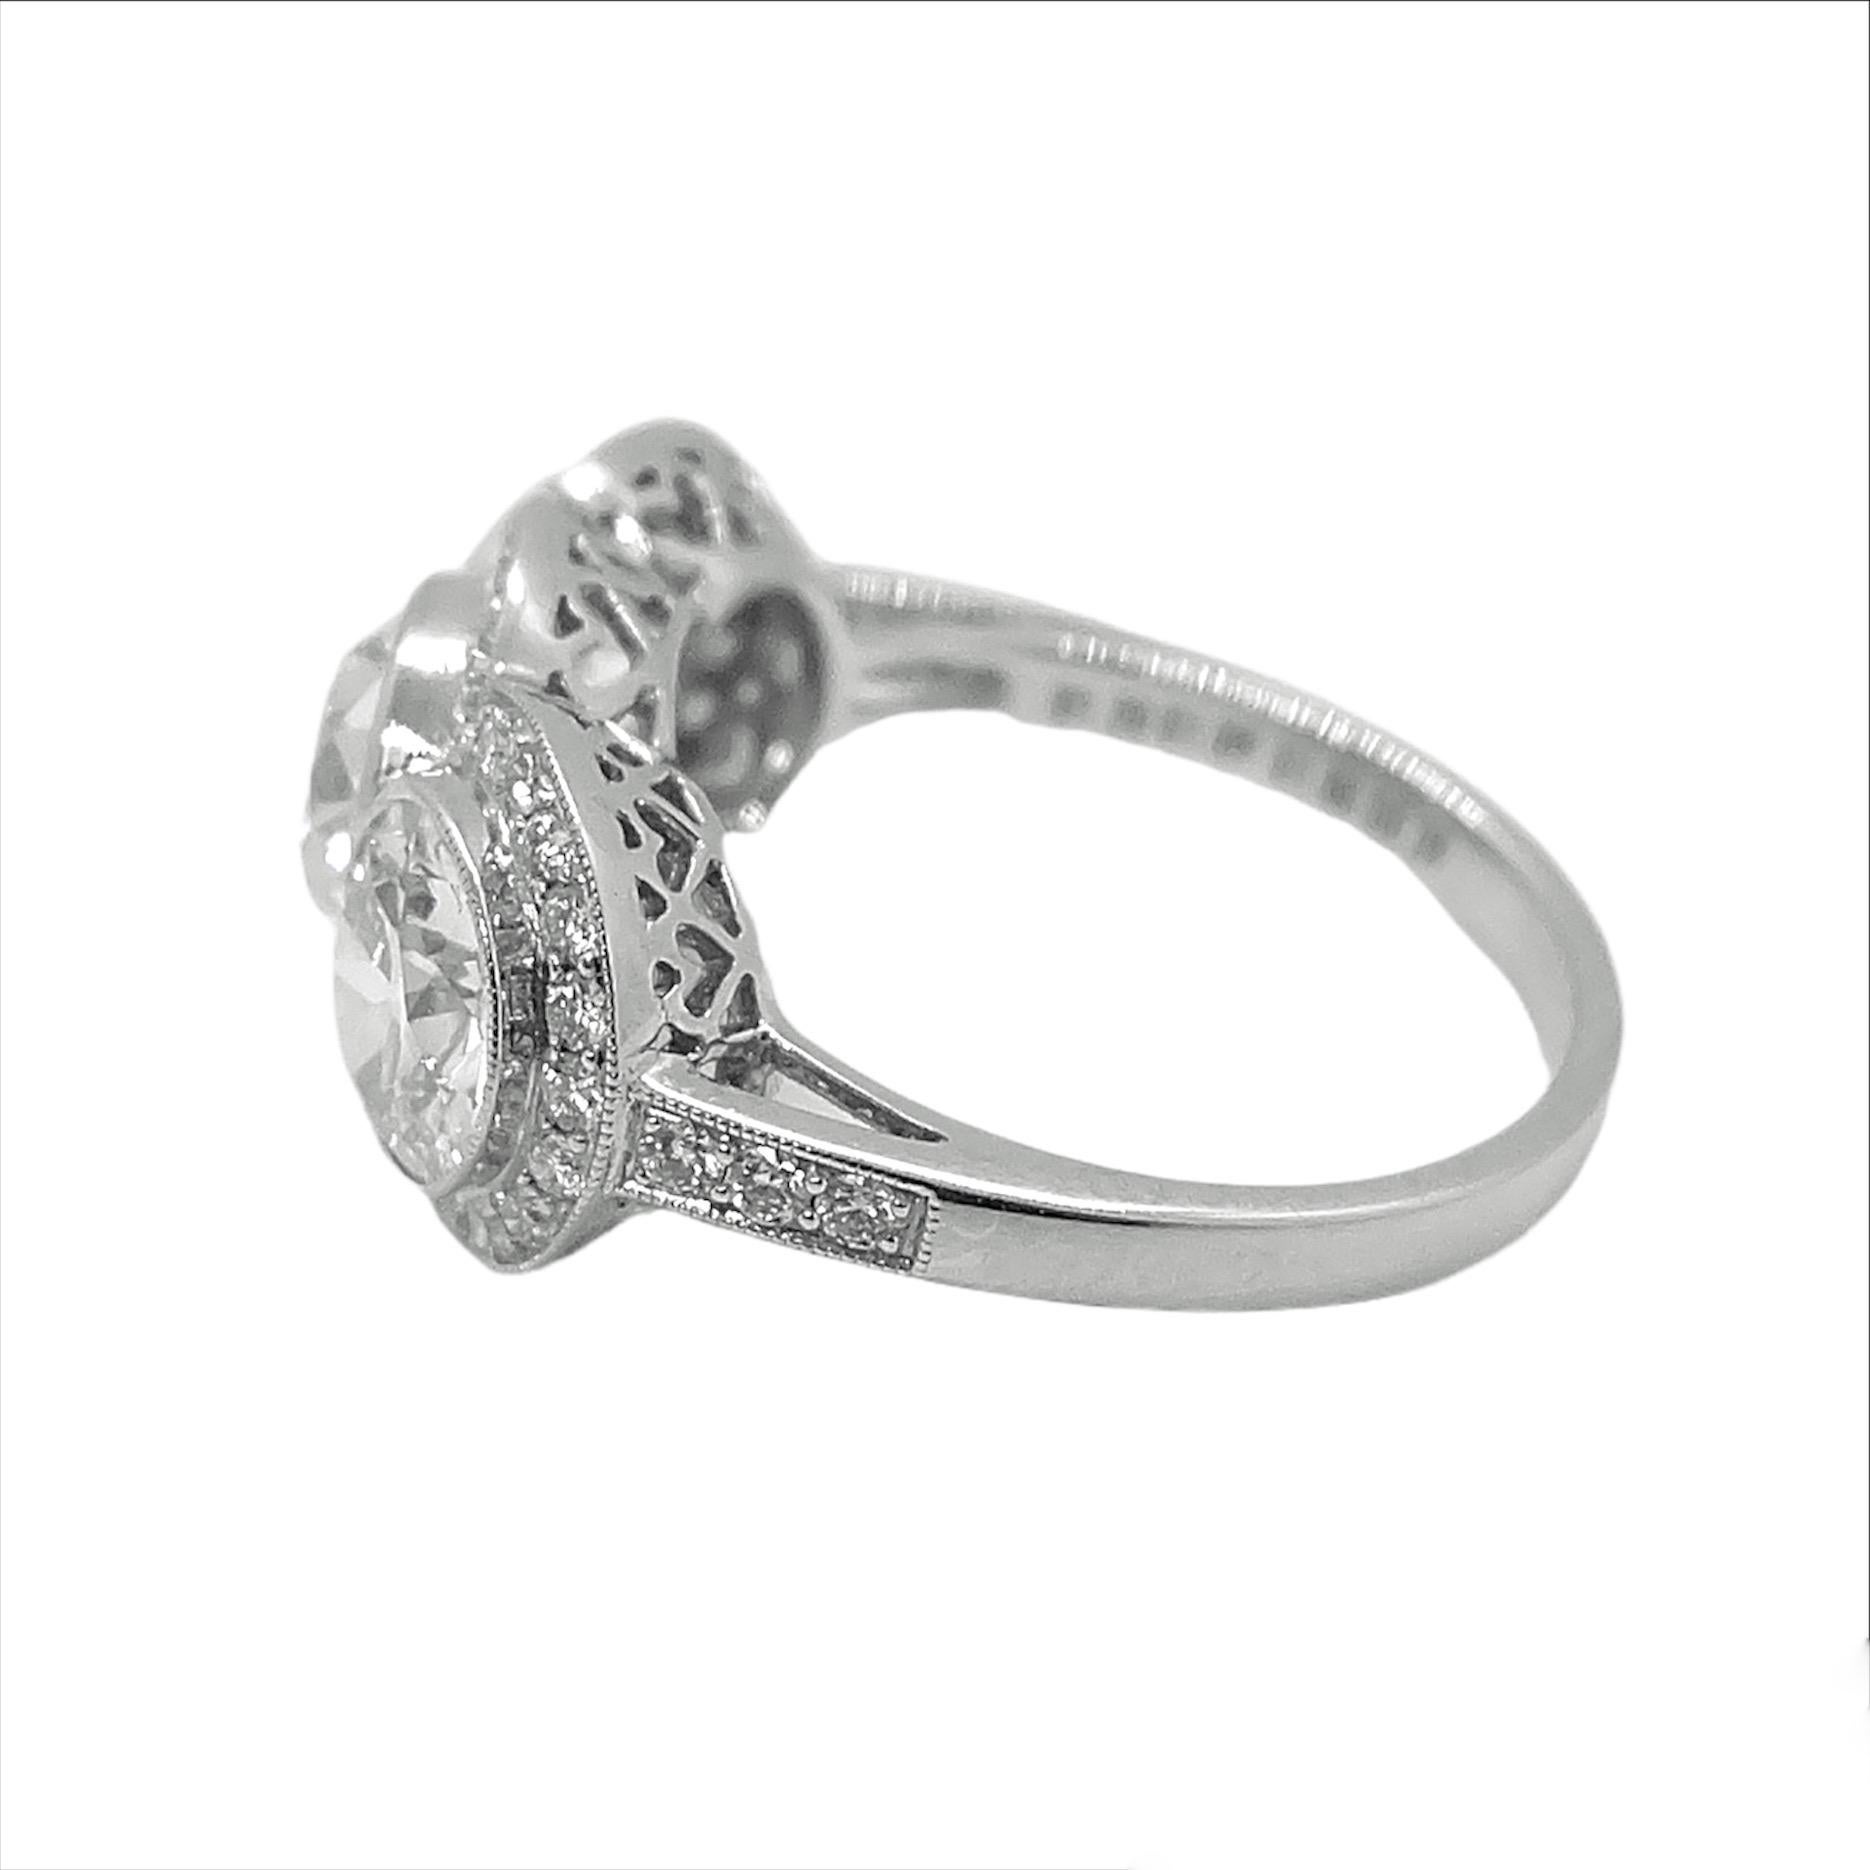 This stunning platinum ring centers a round cut diamond that weighs 1.20 carat flanked by two round cut diamonds that weigh 1.01-1.09 carat and surrounded by round cut diamonds that weighs 0.39 carat. 

Available for resizing.

Sophia D by Joseph